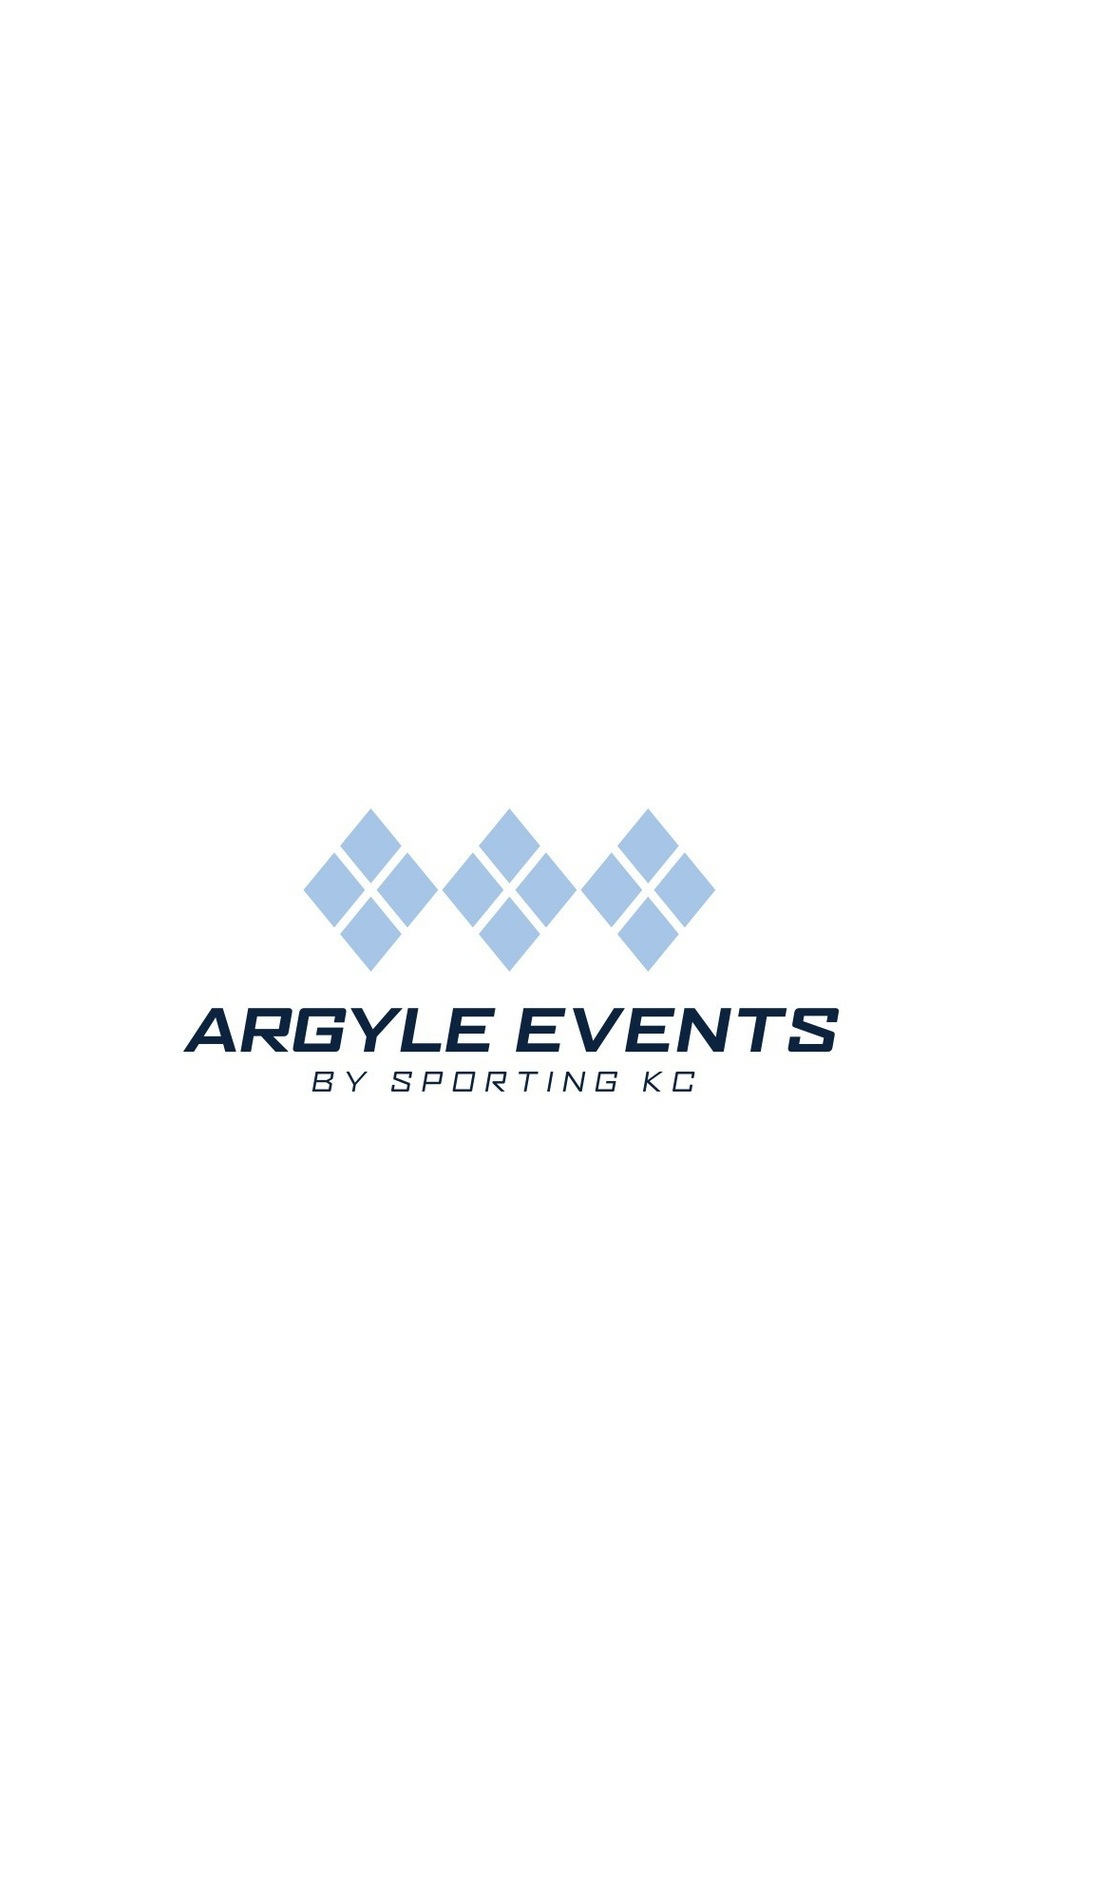 A Sporting Club Special Events live event